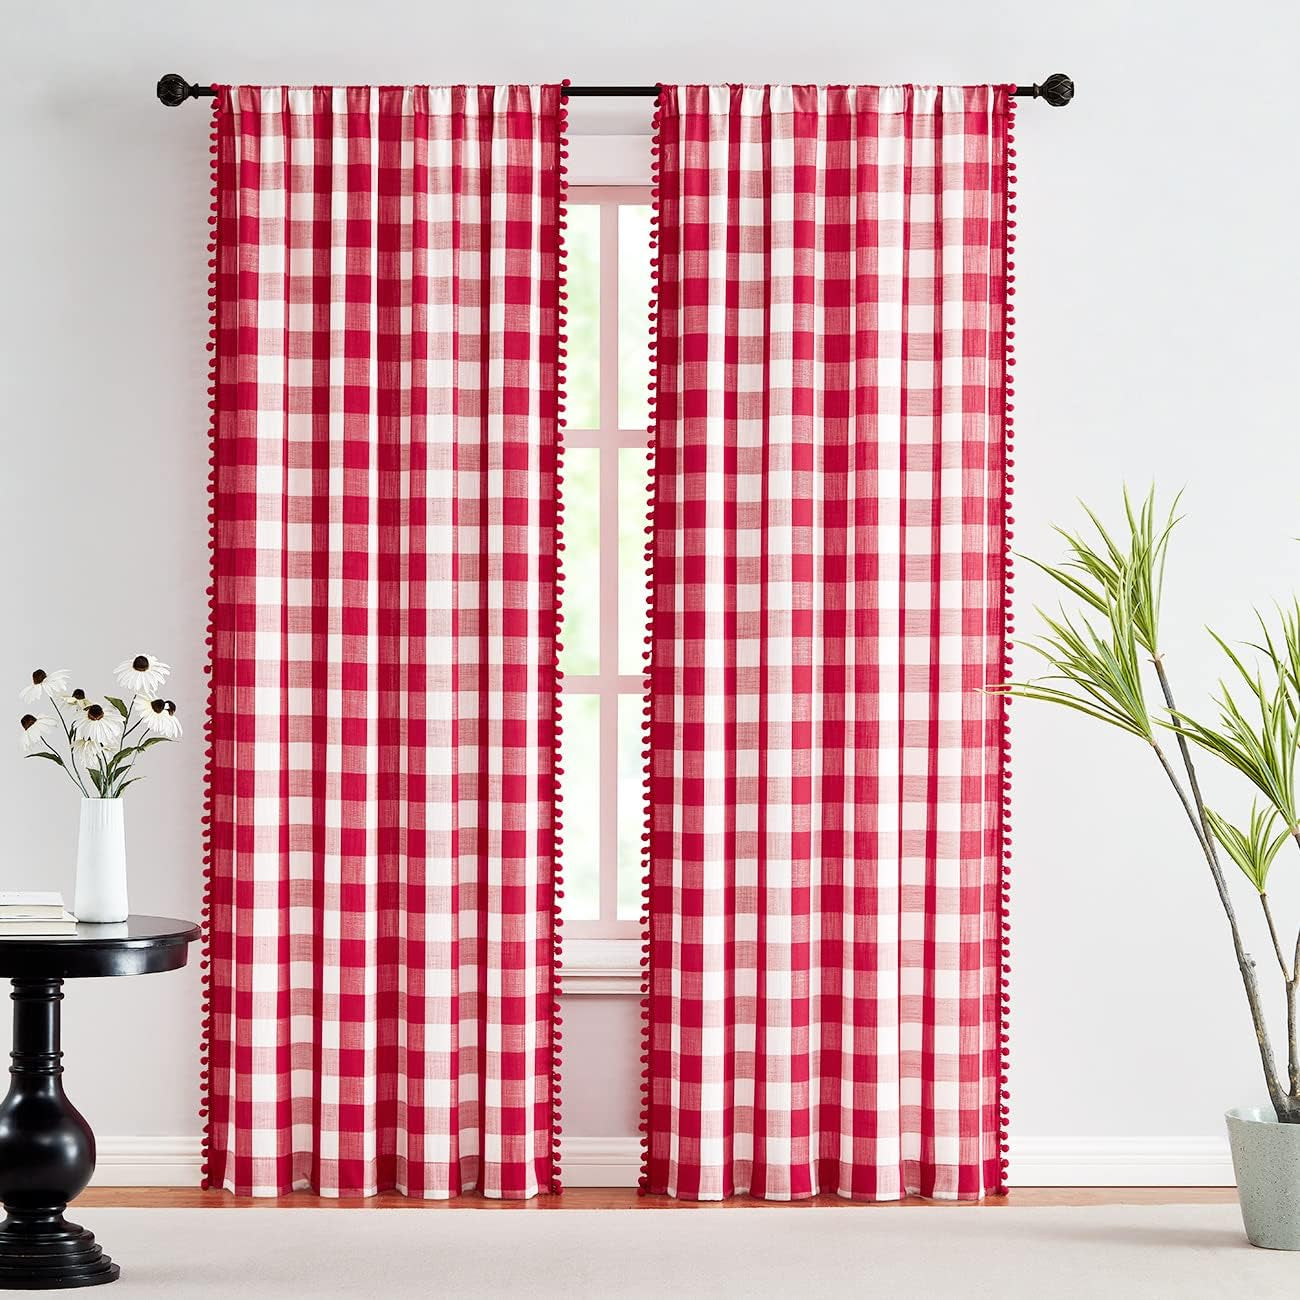 Treatmentex Buffalo Check Curtains 84Inch Farmhouse Pom Pom Drapes for Living Room Vintage Gingham Plaid Semi Sheer Tan Window Curtains for Bedroom Kitchen 2 Panels Rod Pocket Taupe and White  Natural Decoratex Red And White 40"W X 63"L 2Pcs 